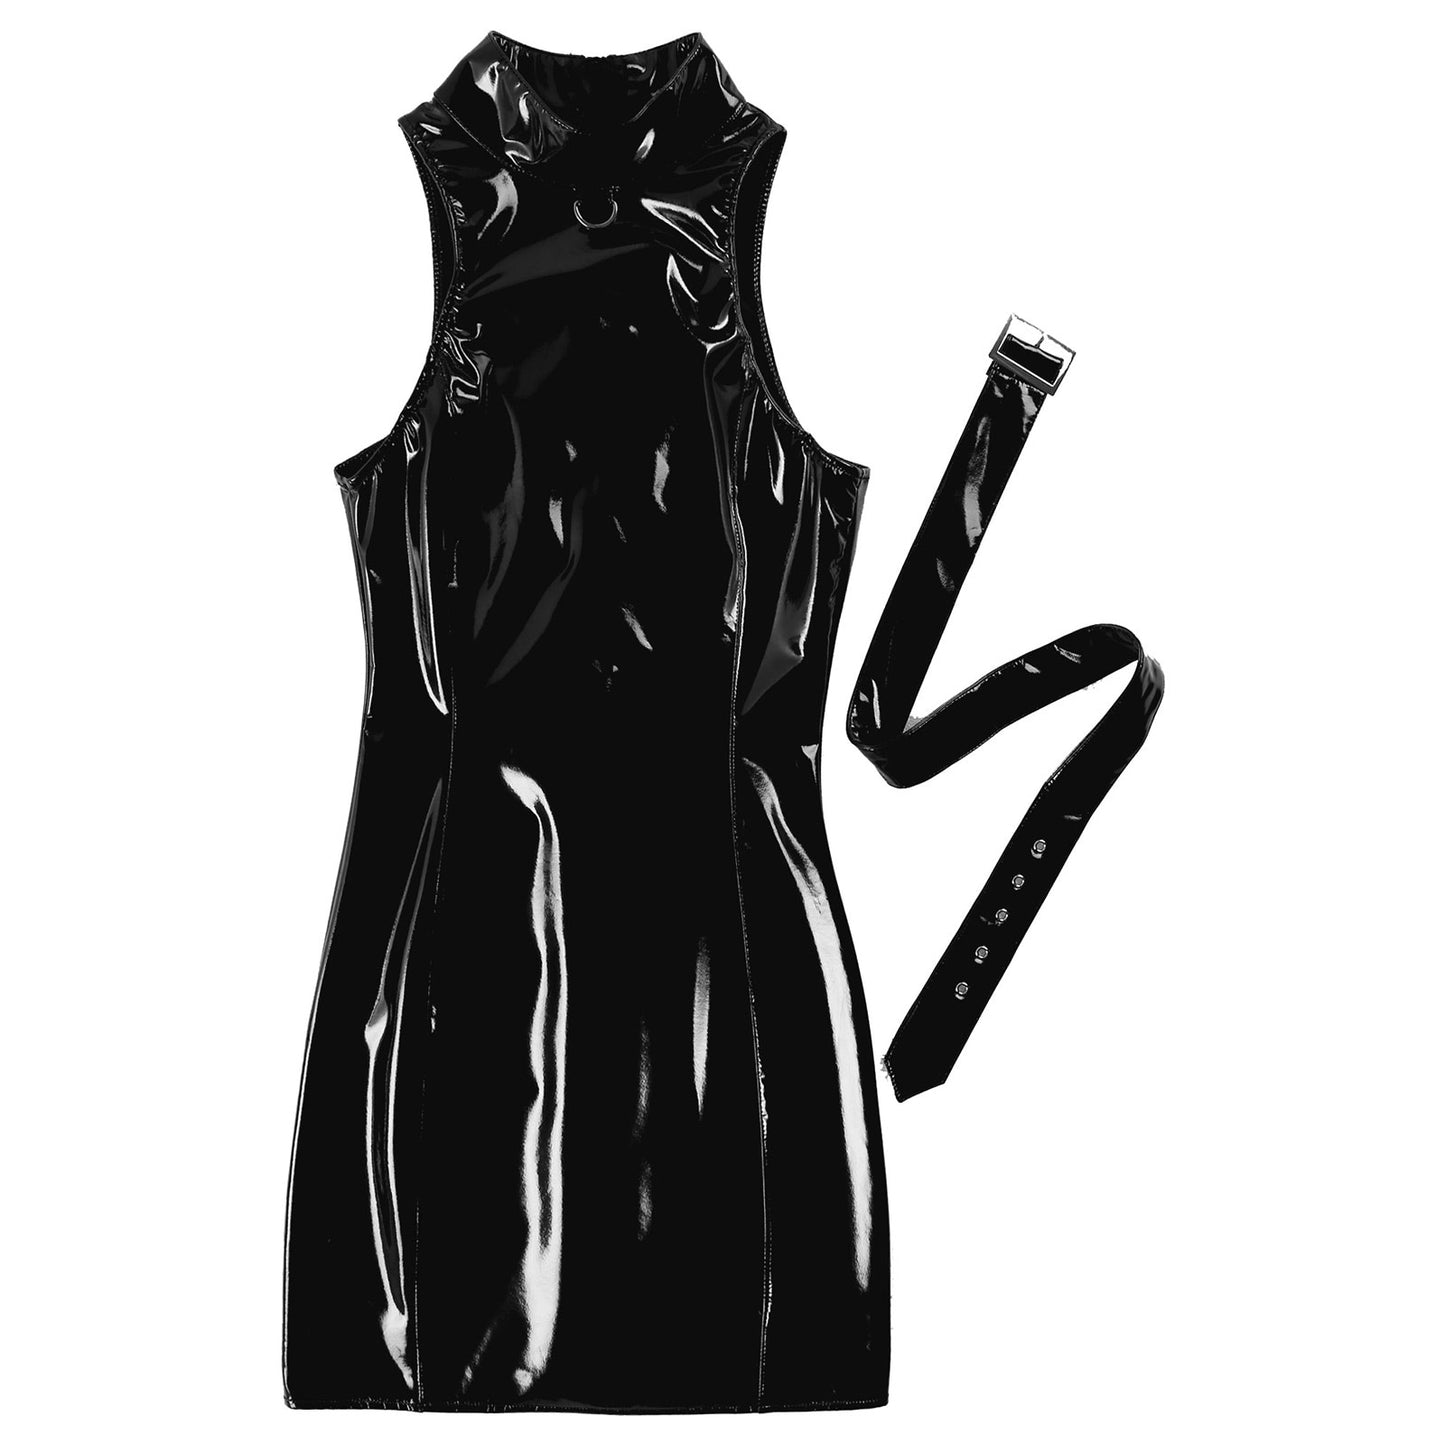 Womens Sexy Clubwear Rave Evening Party Sleeveless Dress Wet Look Leather Back Zipper Closure Bodycon Mini Dress with Belt